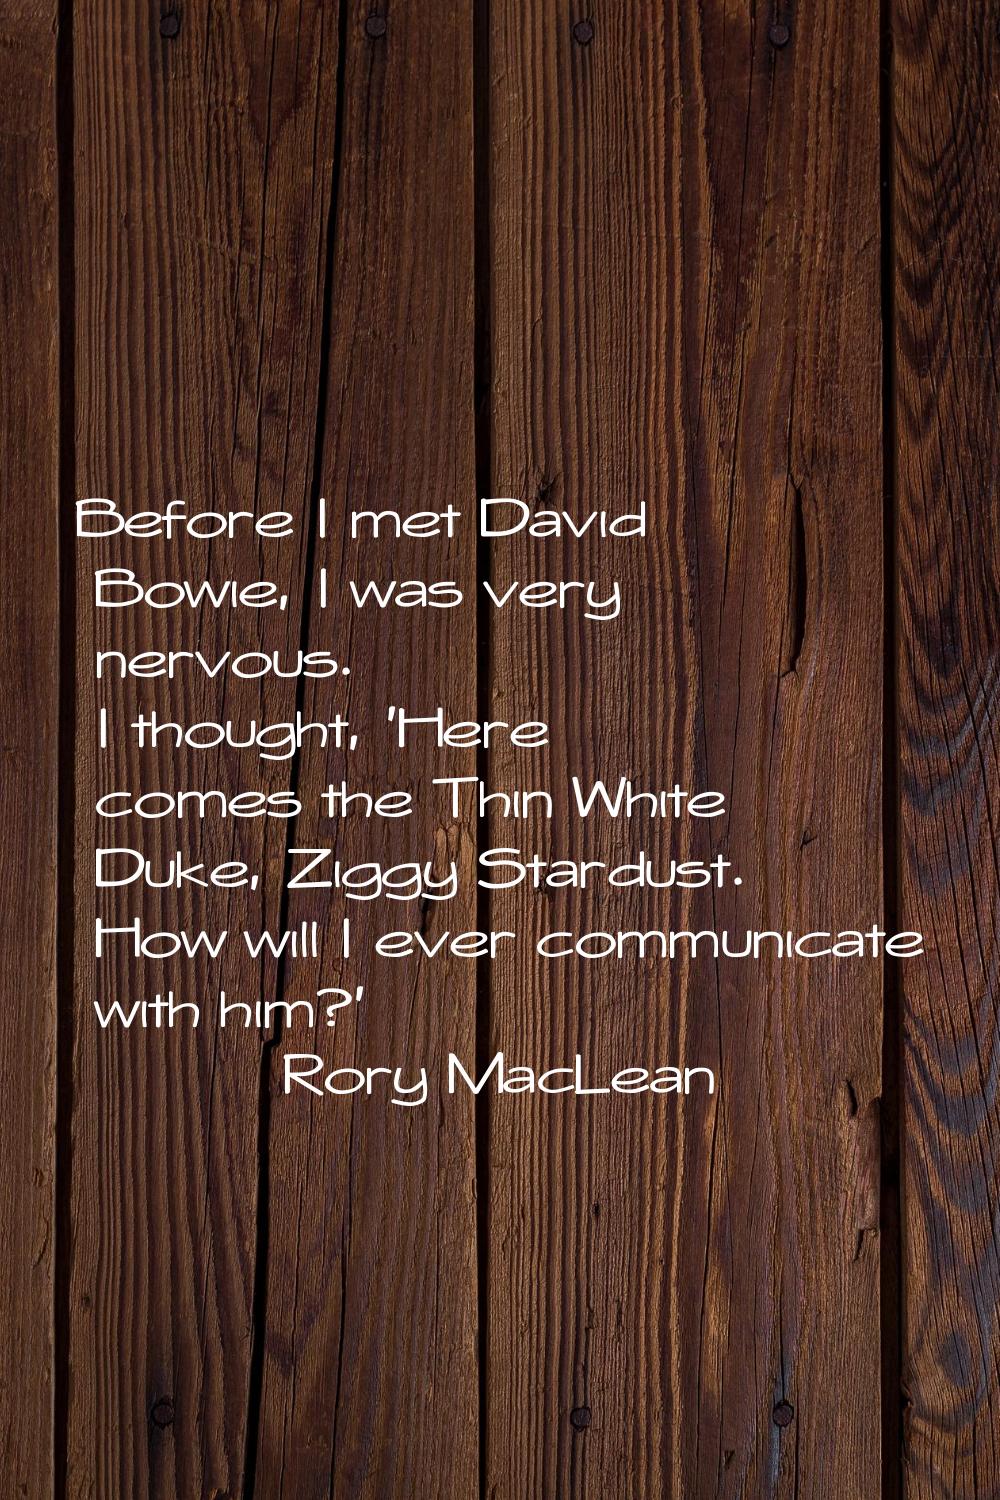 Before I met David Bowie, I was very nervous. I thought, 'Here comes the Thin White Duke, Ziggy Sta